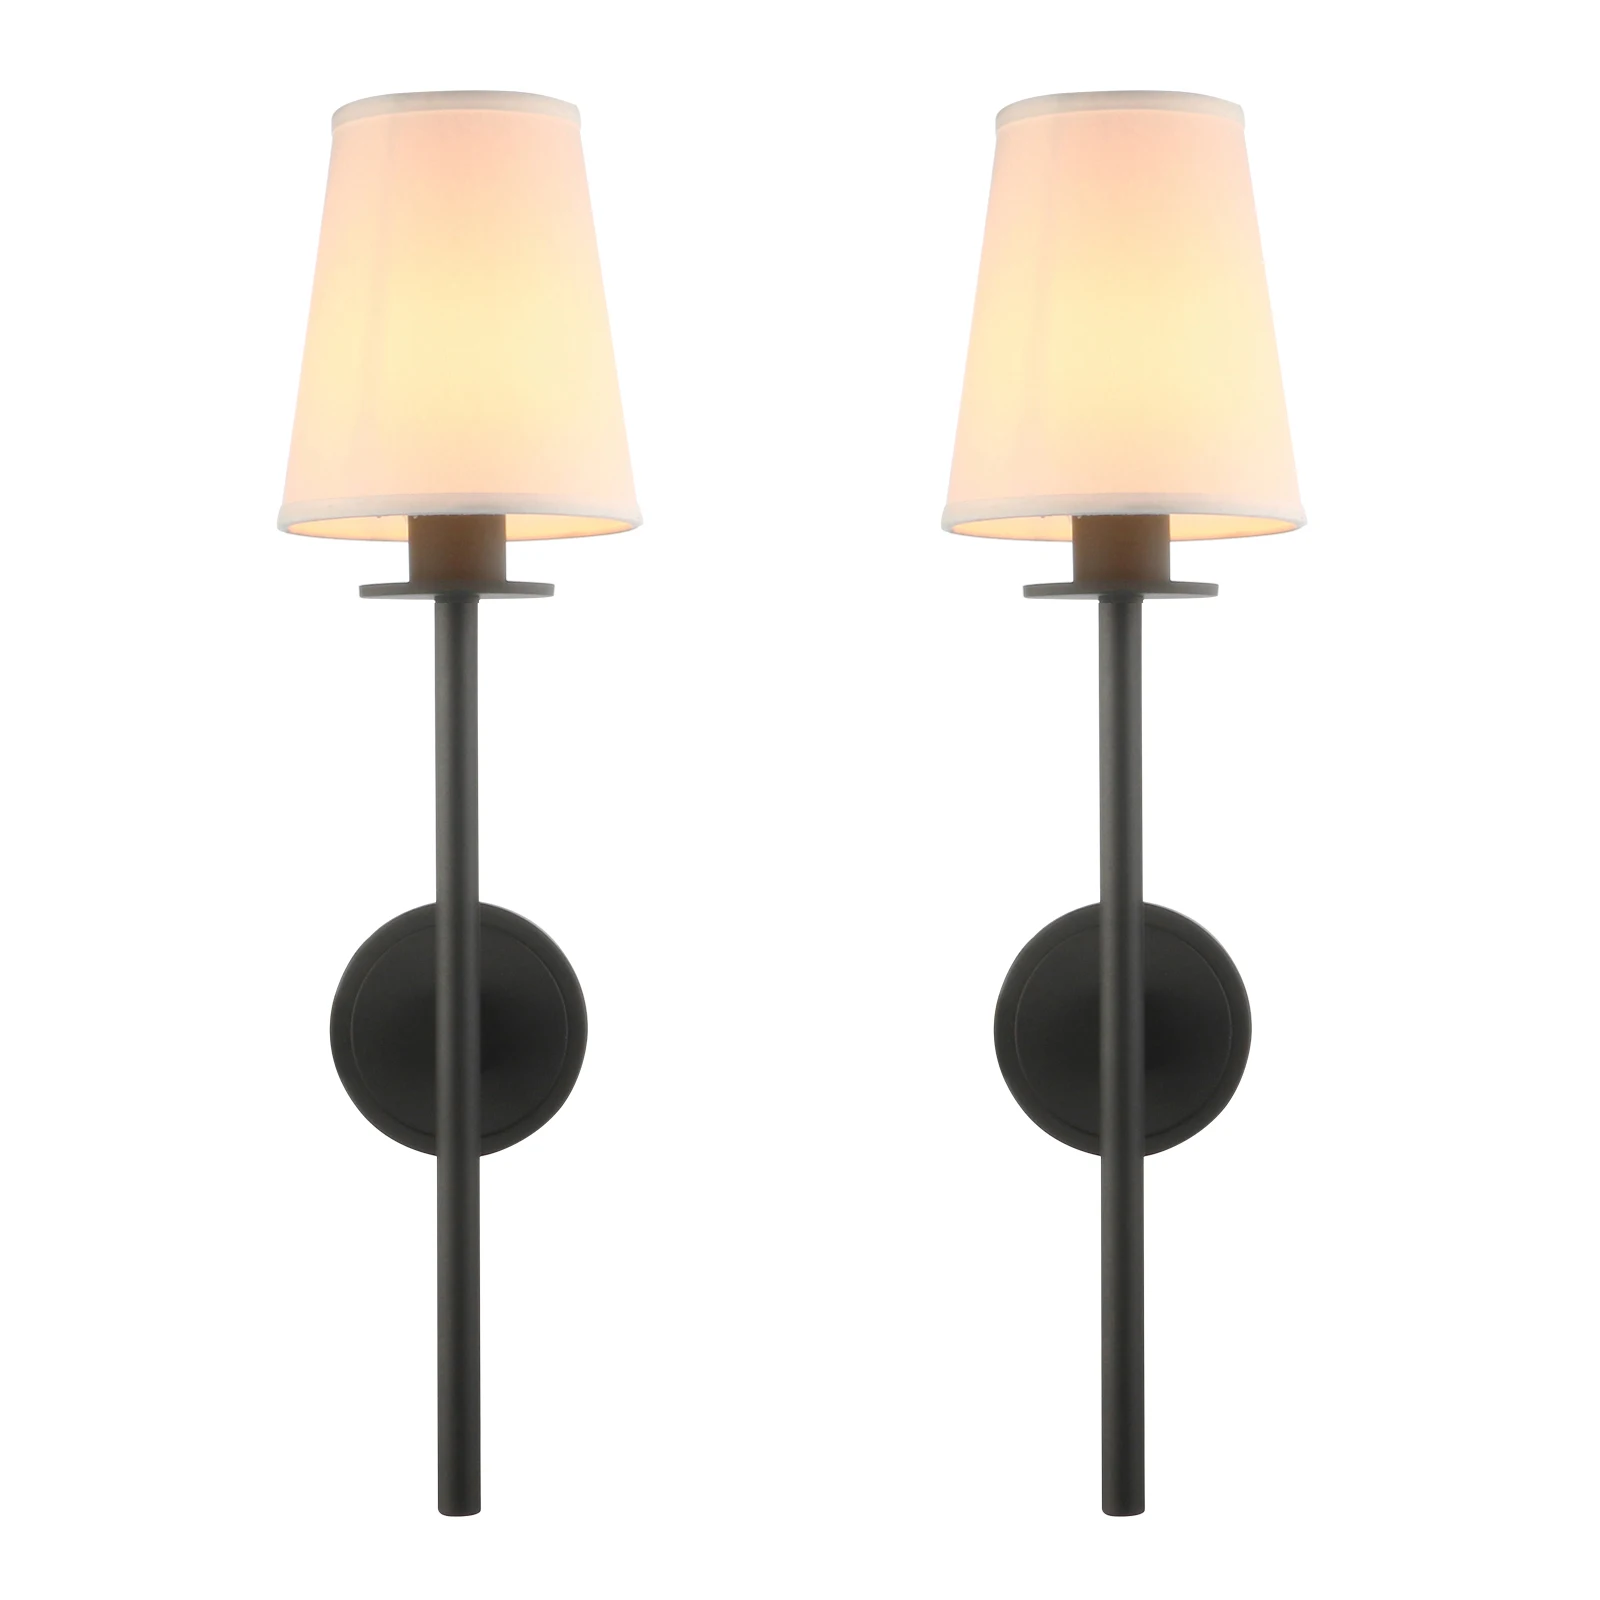 

Permo Set of 2 Modern Classy Vintage Wall Sconce with Flared White Textile Lamp Shade Living Room Bedside Reading